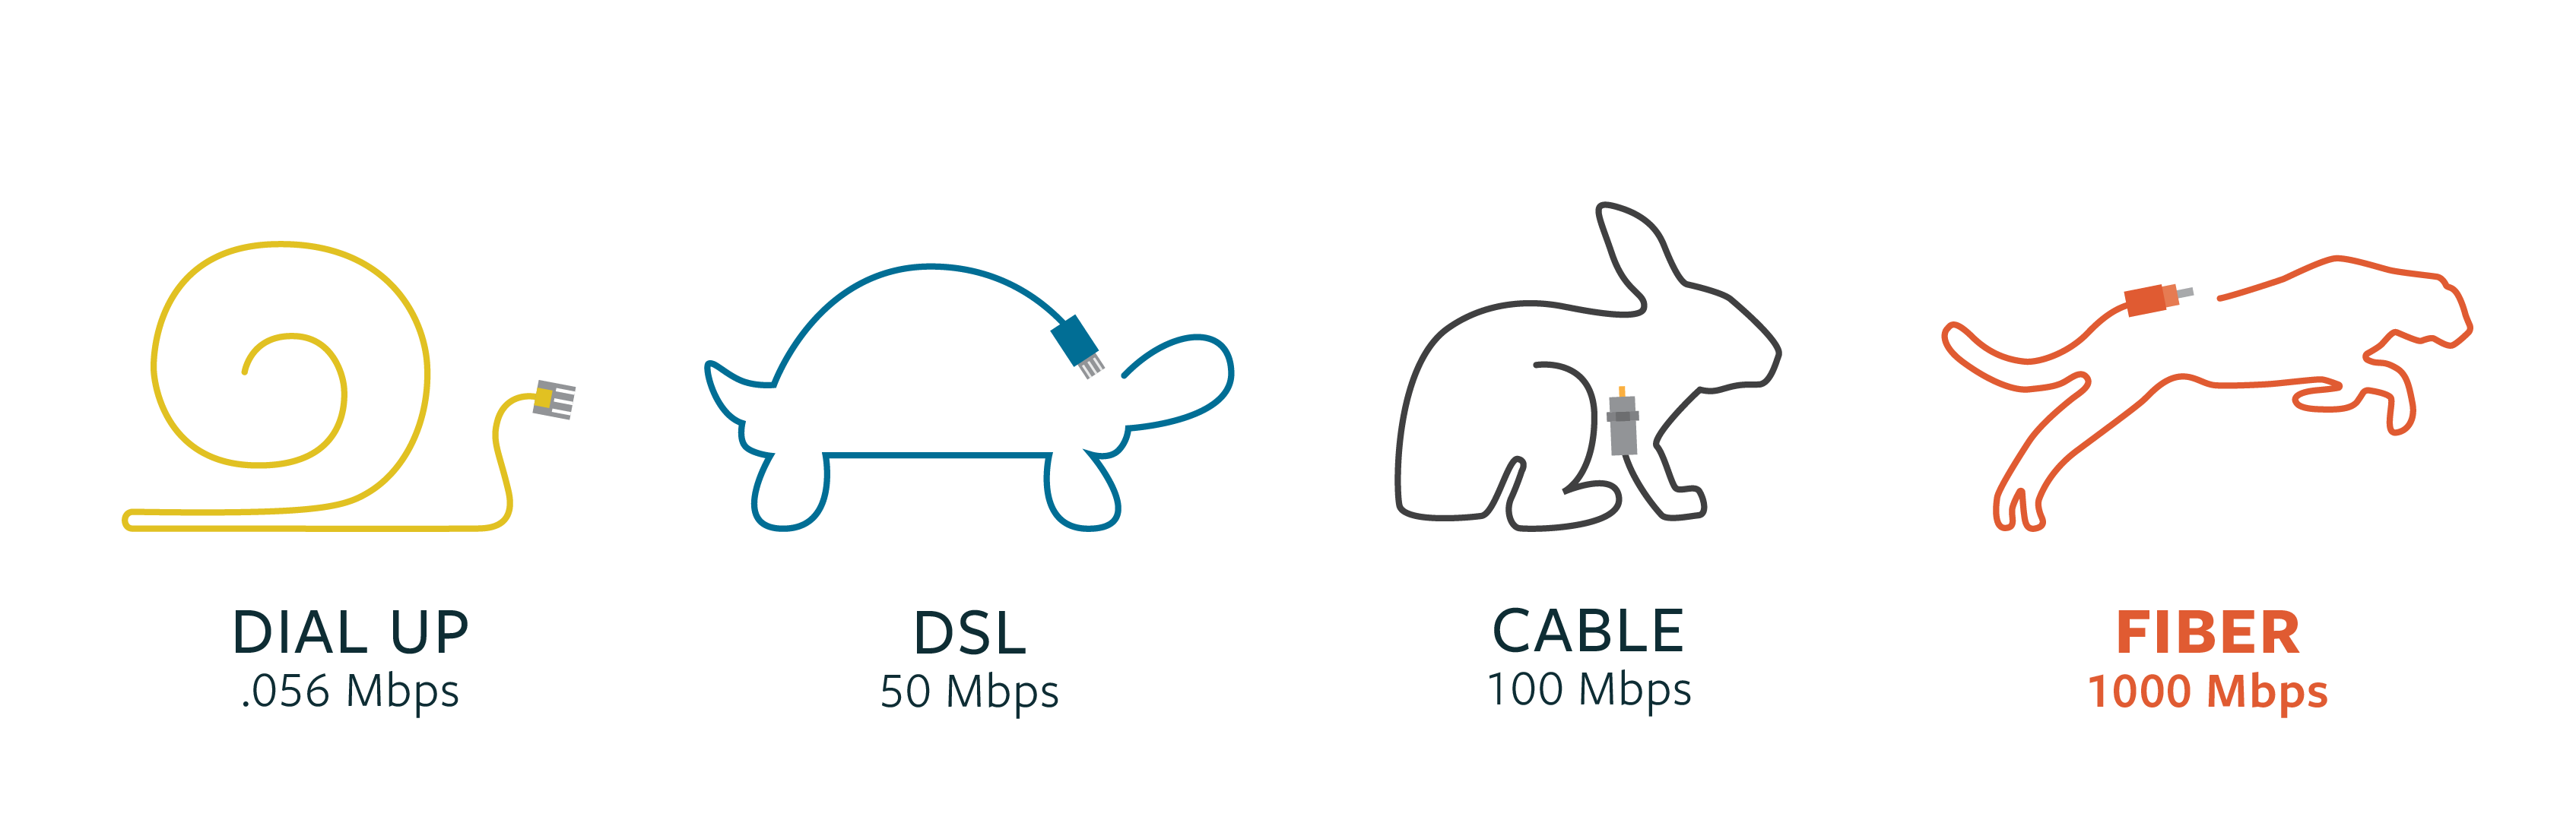 stylized images depicting a snail as dial up, a turtle as dsl, a rabbit as cable, and a cheetah as fiber